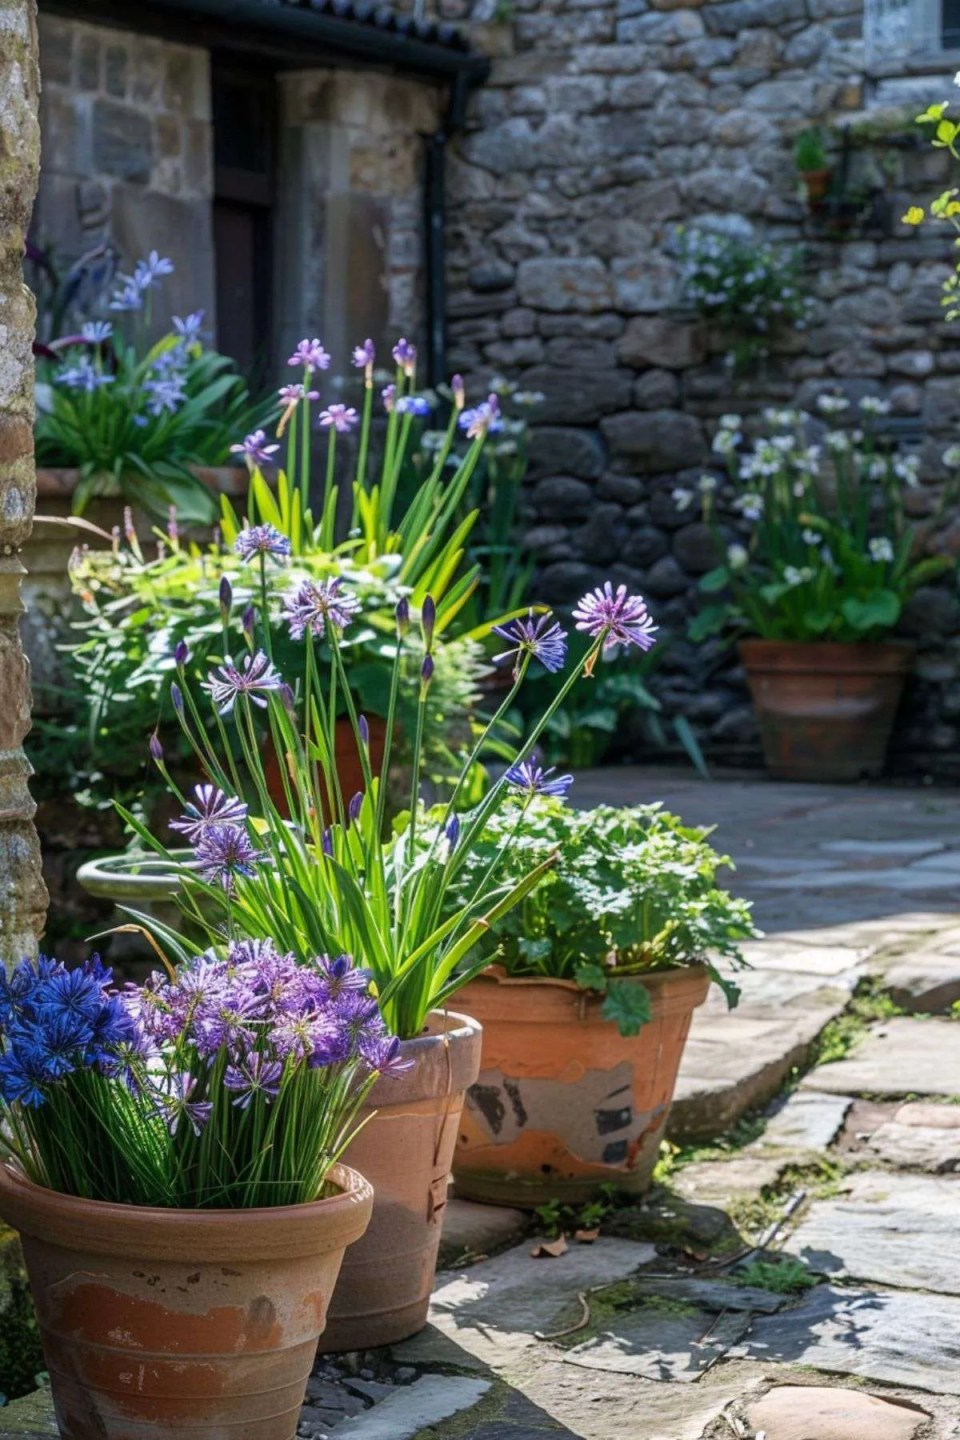 hibiscus and agapanthus plants in terracotta pots in a garden with a stone wall